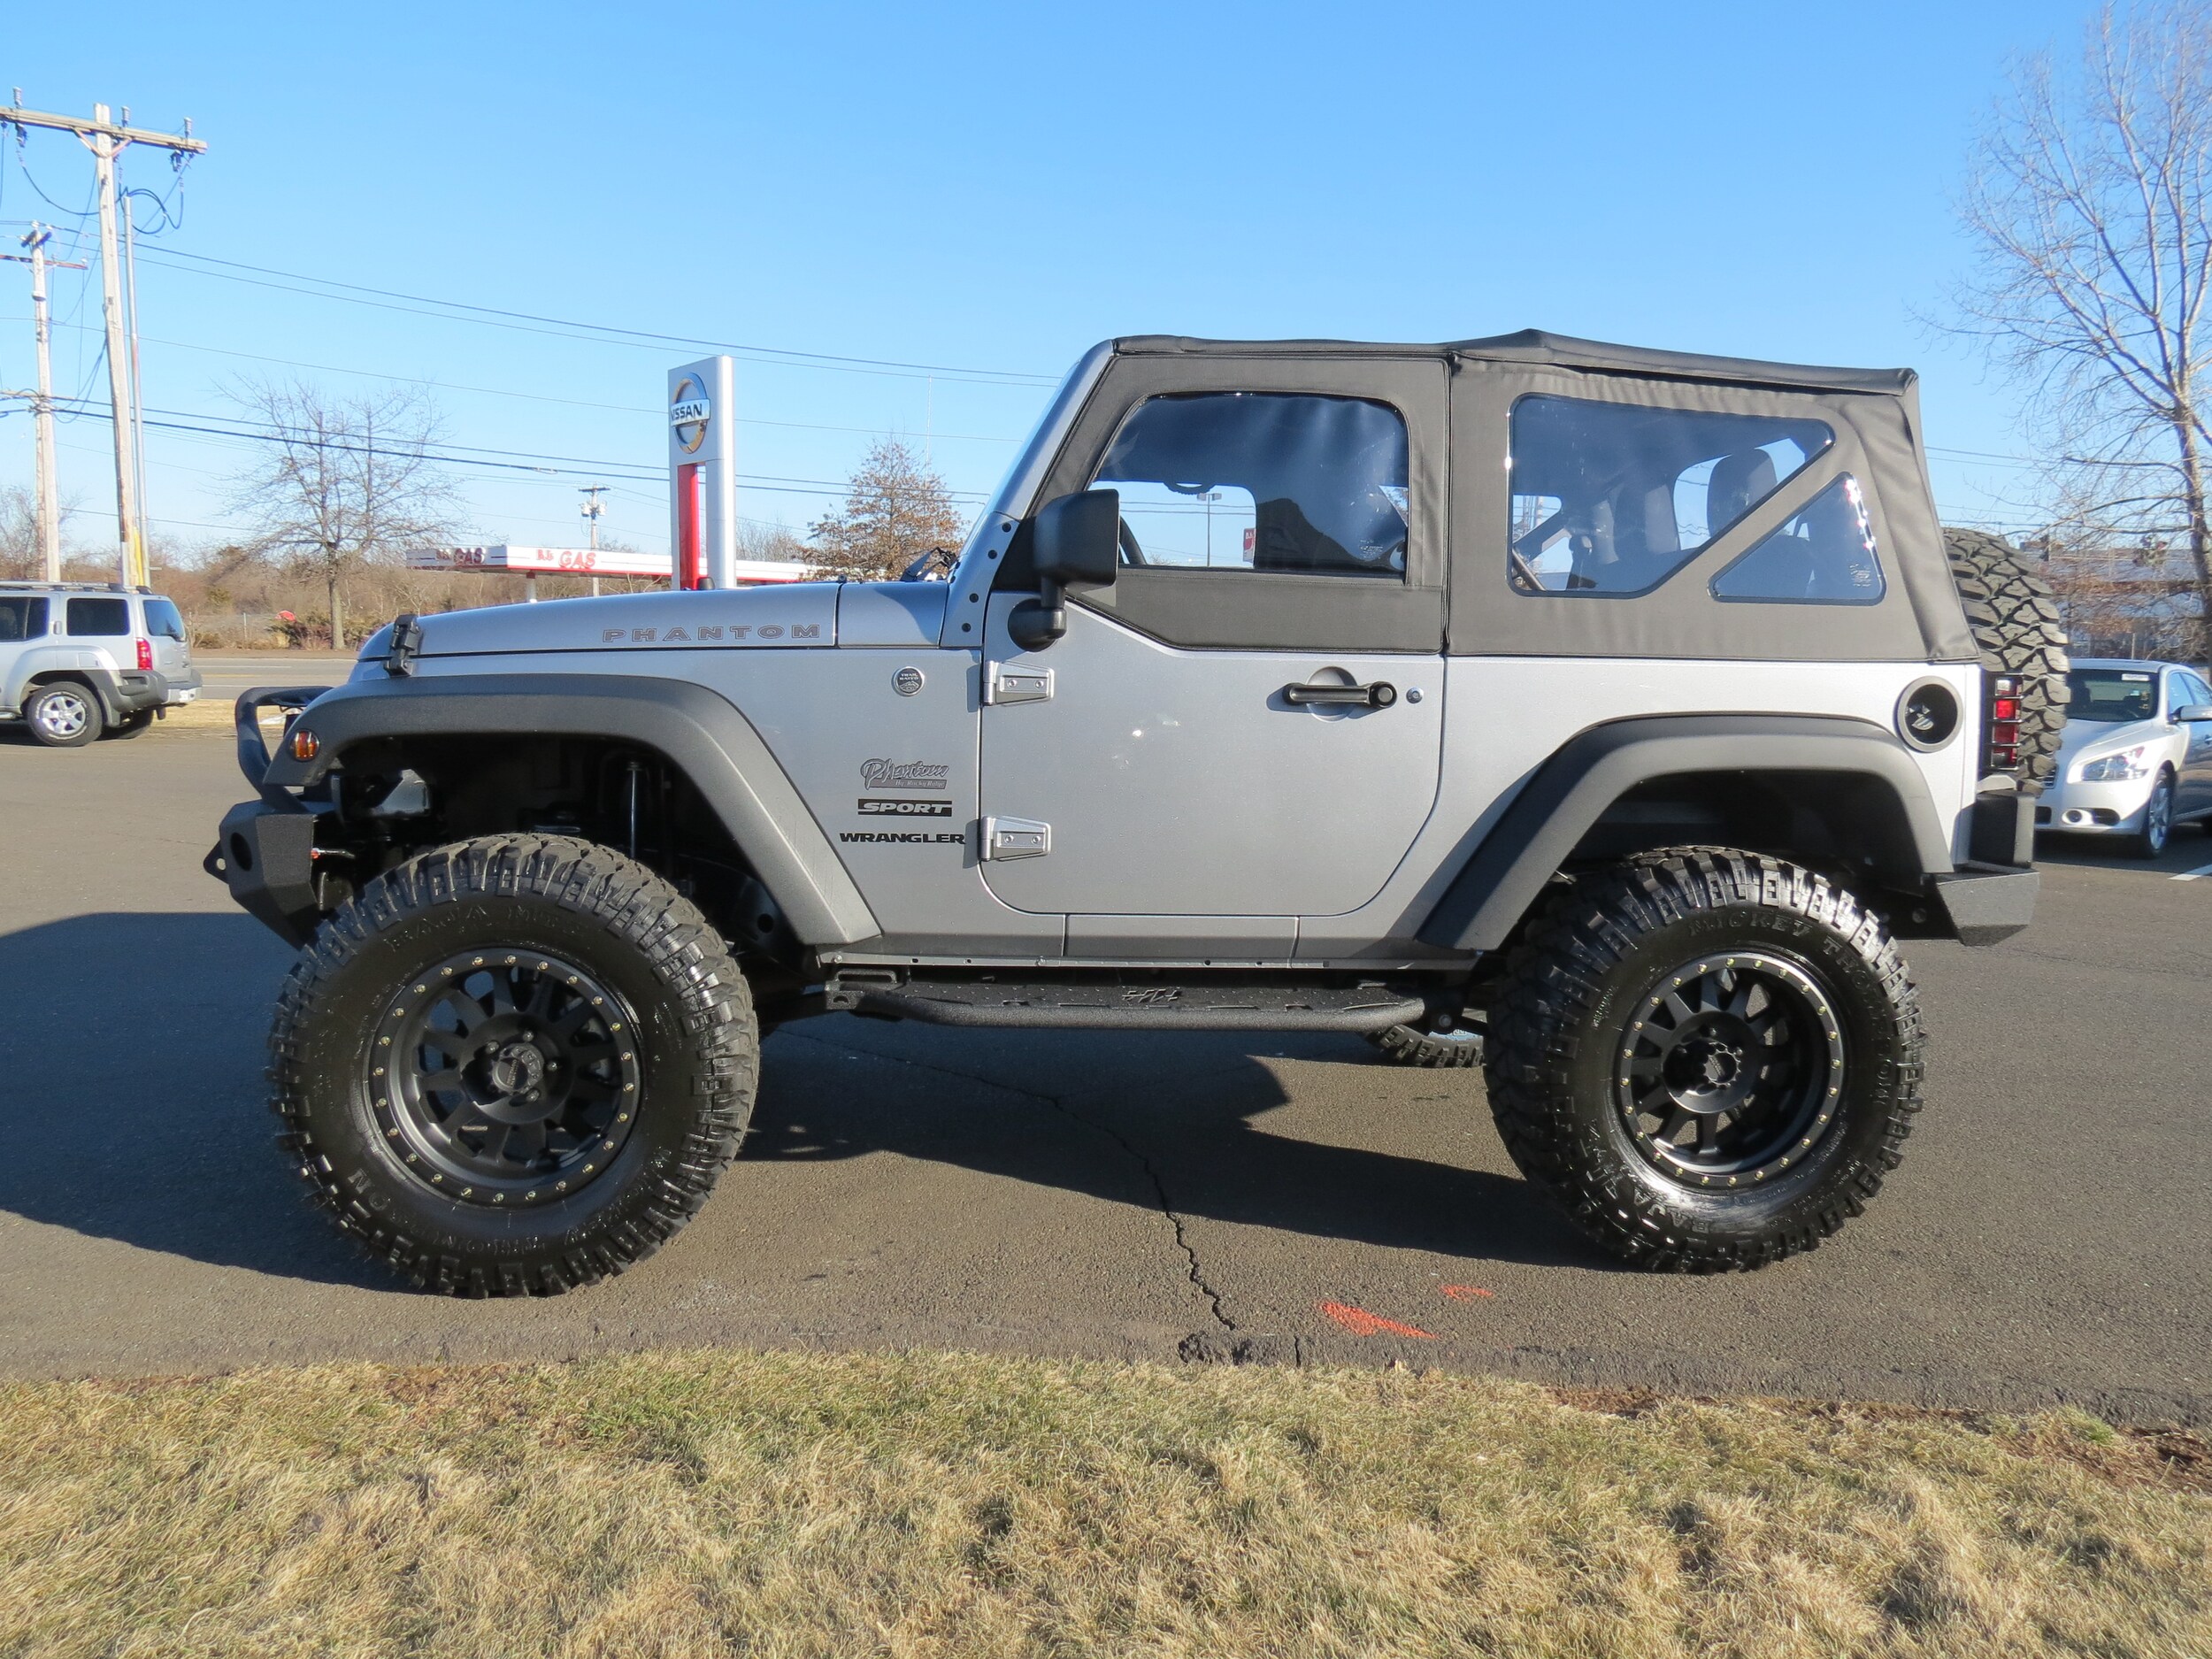 Executive jeep nissan north haven ct #8